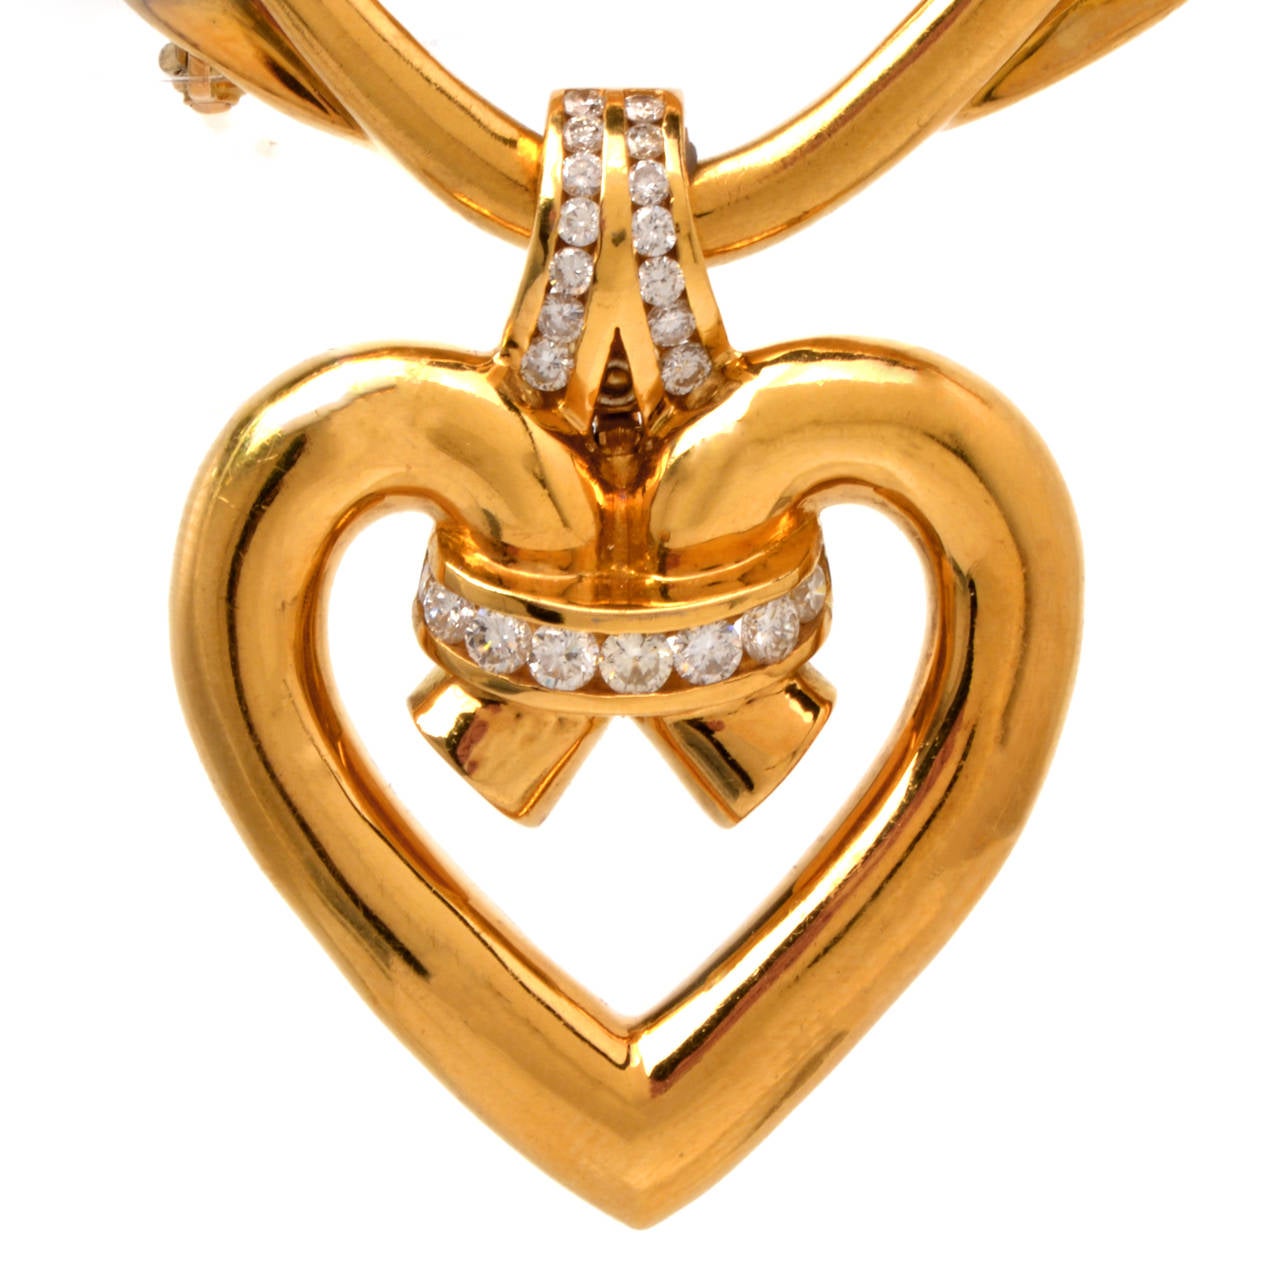 This alluring estate Krypell brooch of distinct aesthetic is crafted in solid 18k yellow gold, weighs approx. 32.1 grams and measures app. 60mm x 50mm.  This exquisite versatile pin could be worn as a heart pendant insert with a gold chain or pearl